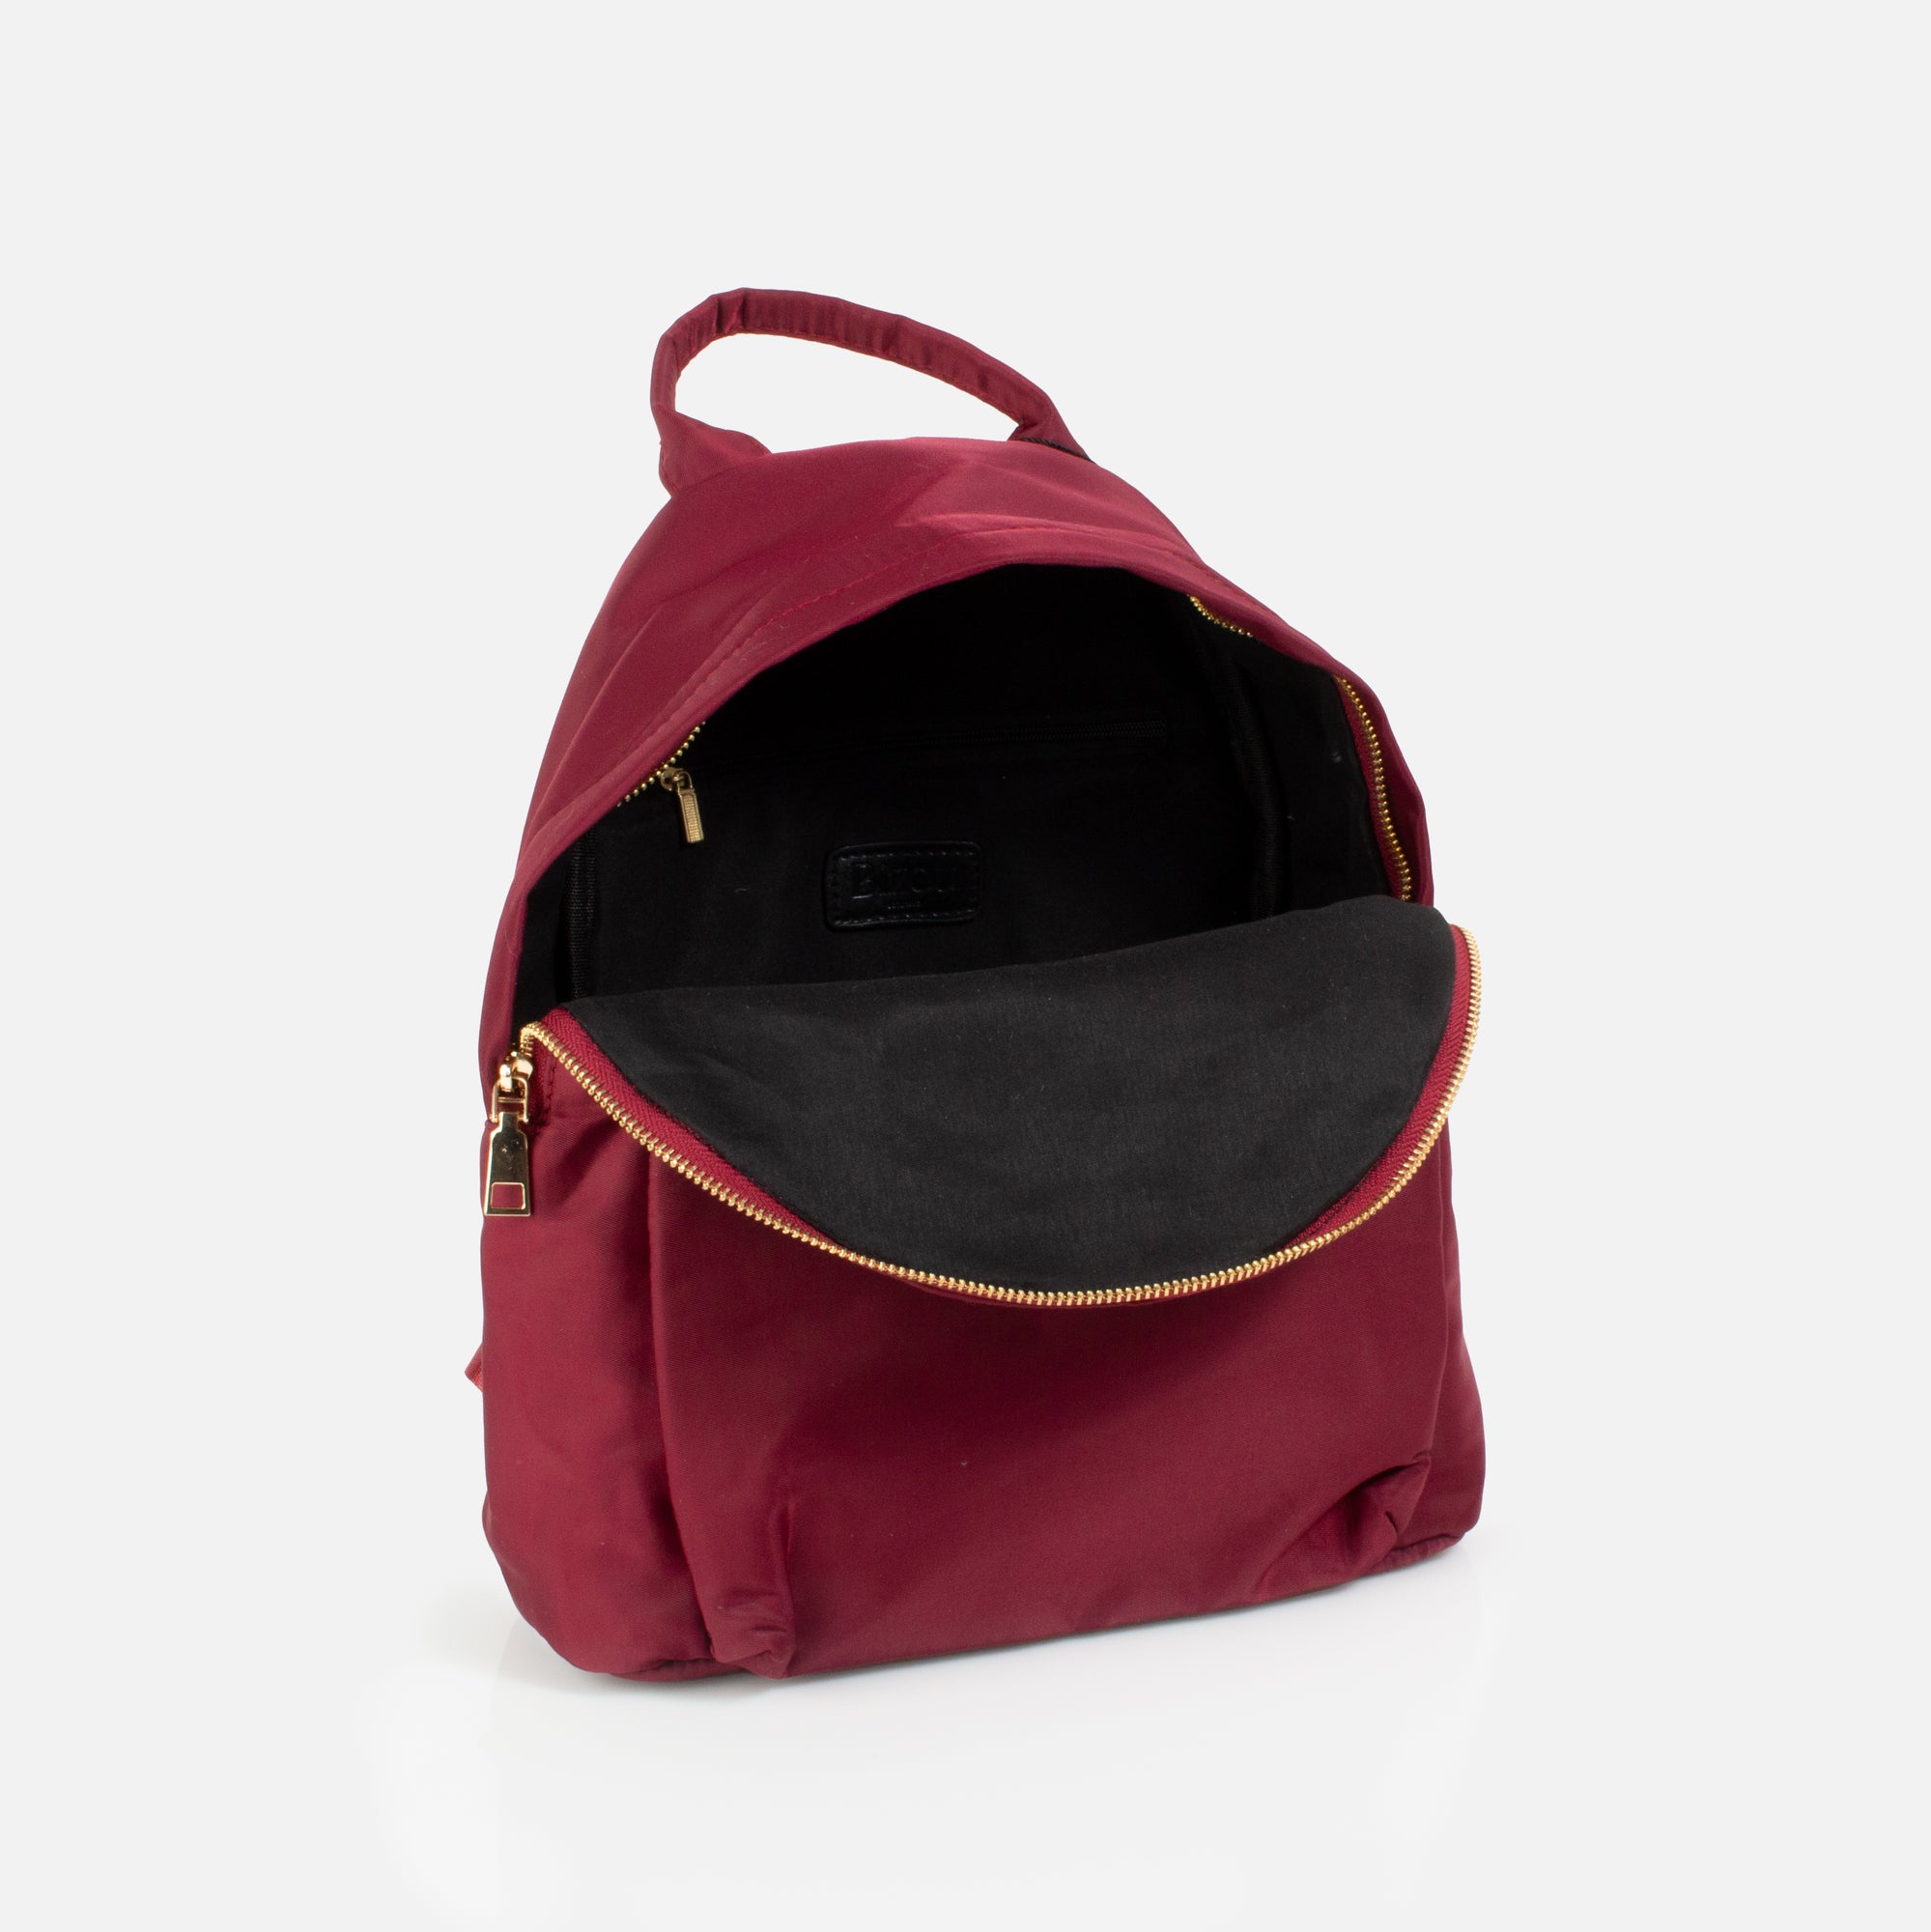 Wine red backpack